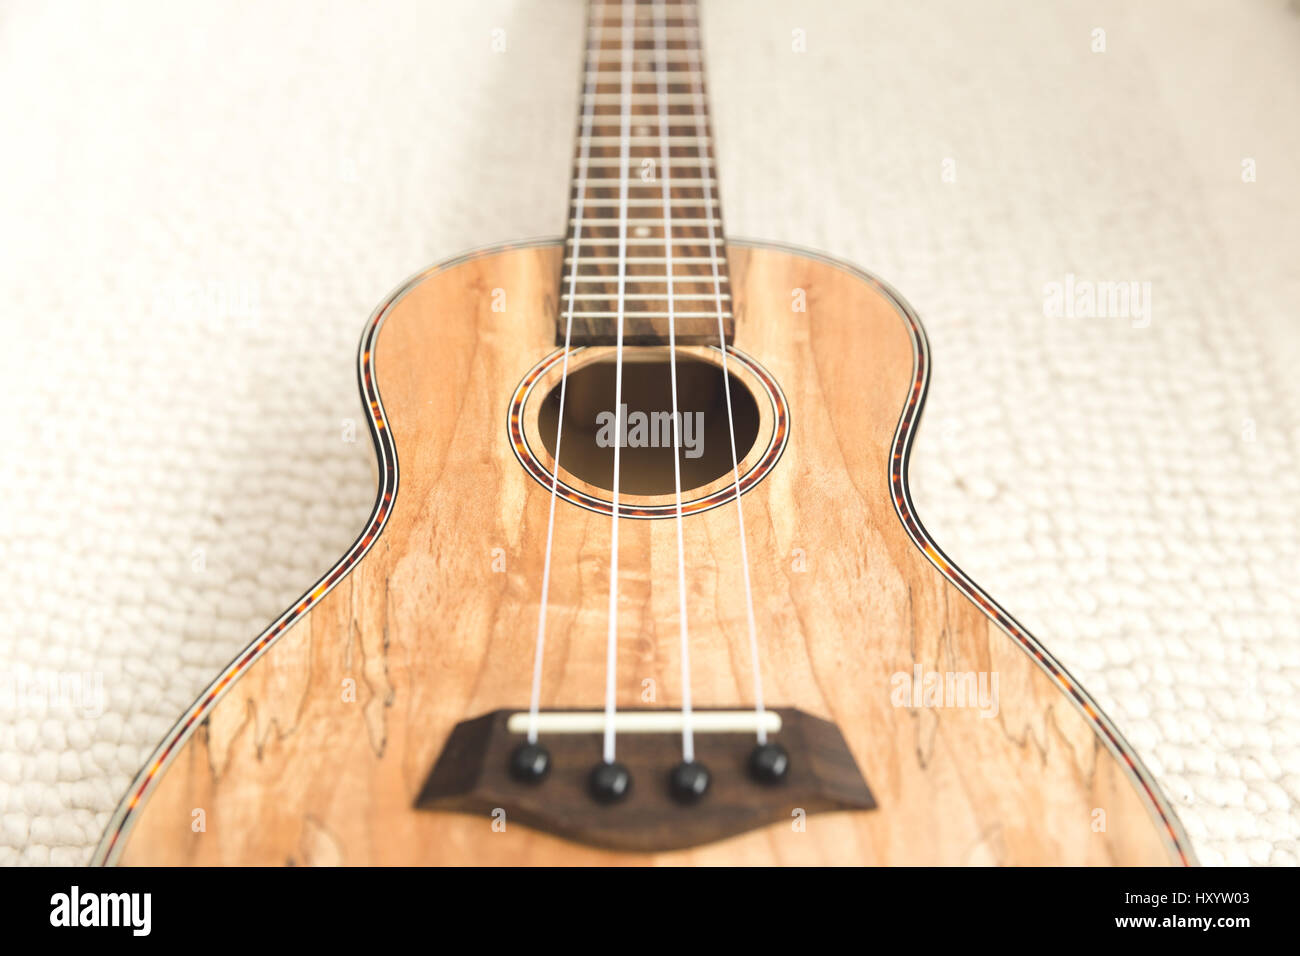 New, upscale ukulele with four strings and unique, textured wood grain finish. Stock Photo